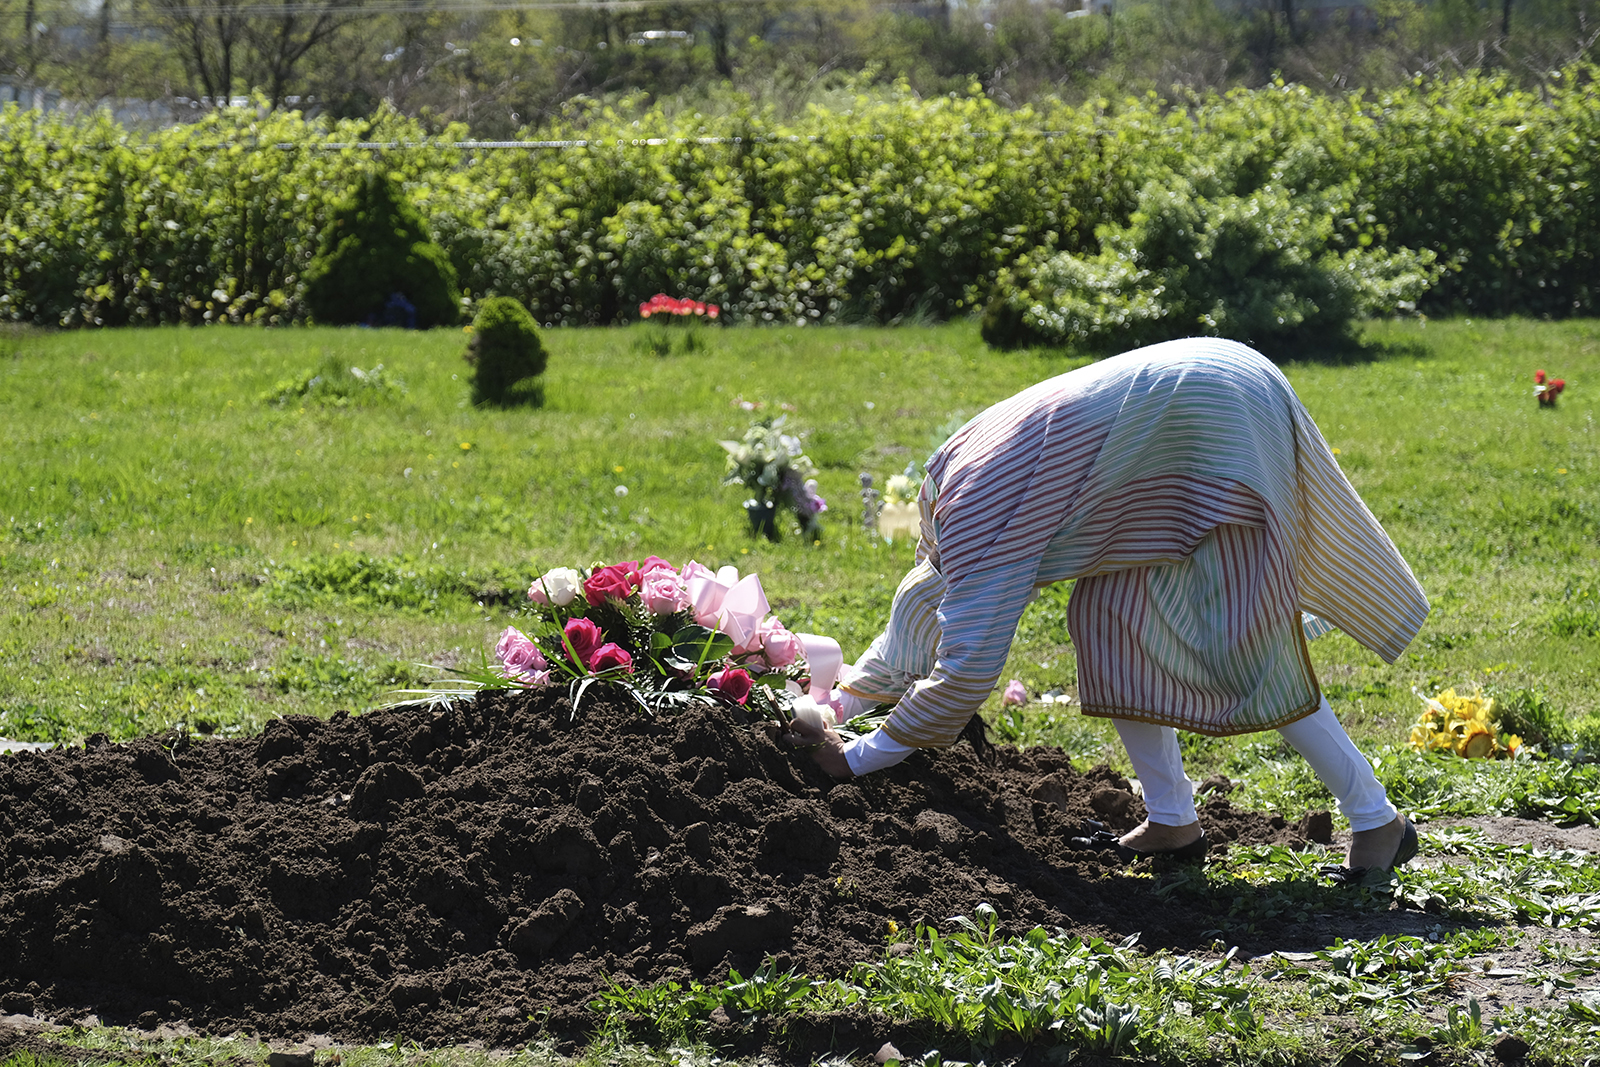 Erika Bermudez becomes emotional as she leans over the grave of her mother, Eudiana Smith, after she was buried in Bayview Cemetery, Saturday, May 2, 2020, in Jersey City, New Jersey. Bermudez was not allowed to approach the gravesite until after cemetery workers had buried her mother completely. Other members of the family and friends stayed in their cars. (AP Photo/Seth Wenig)